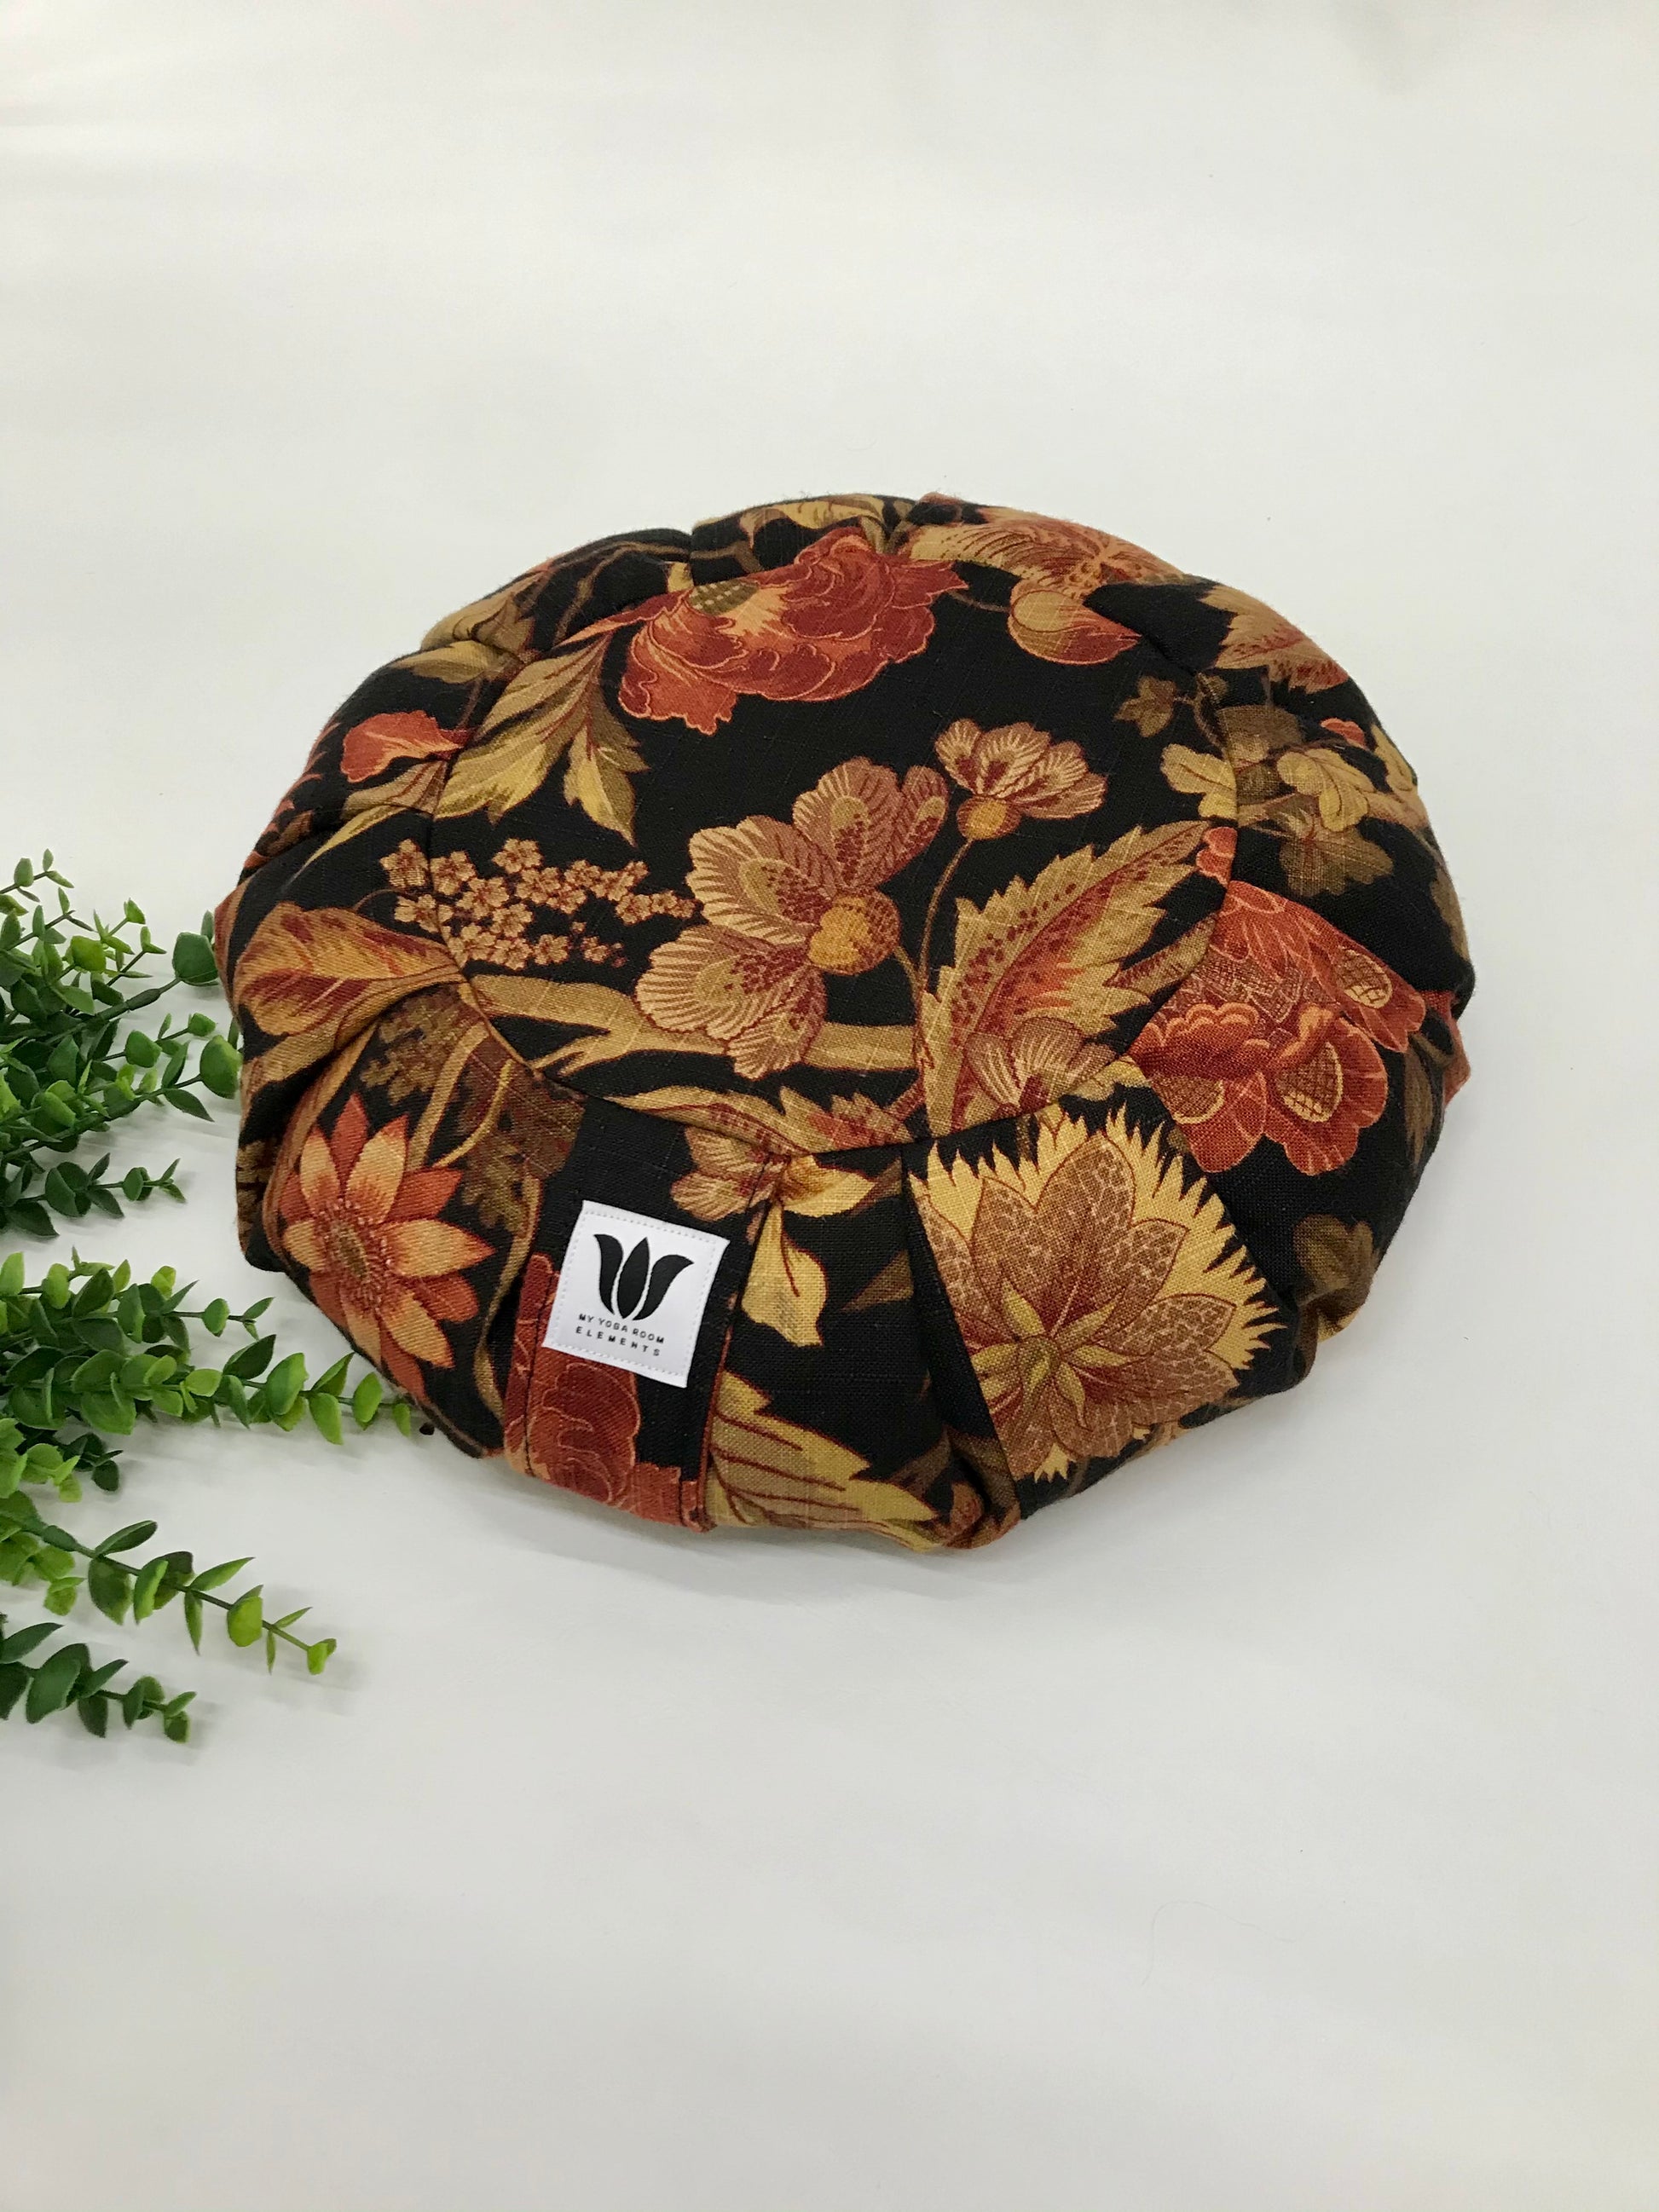 Handcrafted premium linen fabric meditation seat cushion in rich autumn colour floral print fabric.. Align the spine and body in comfort to calm the monkey mind in your meditation practice. Handcrafted in Calgary, Alberta Canada